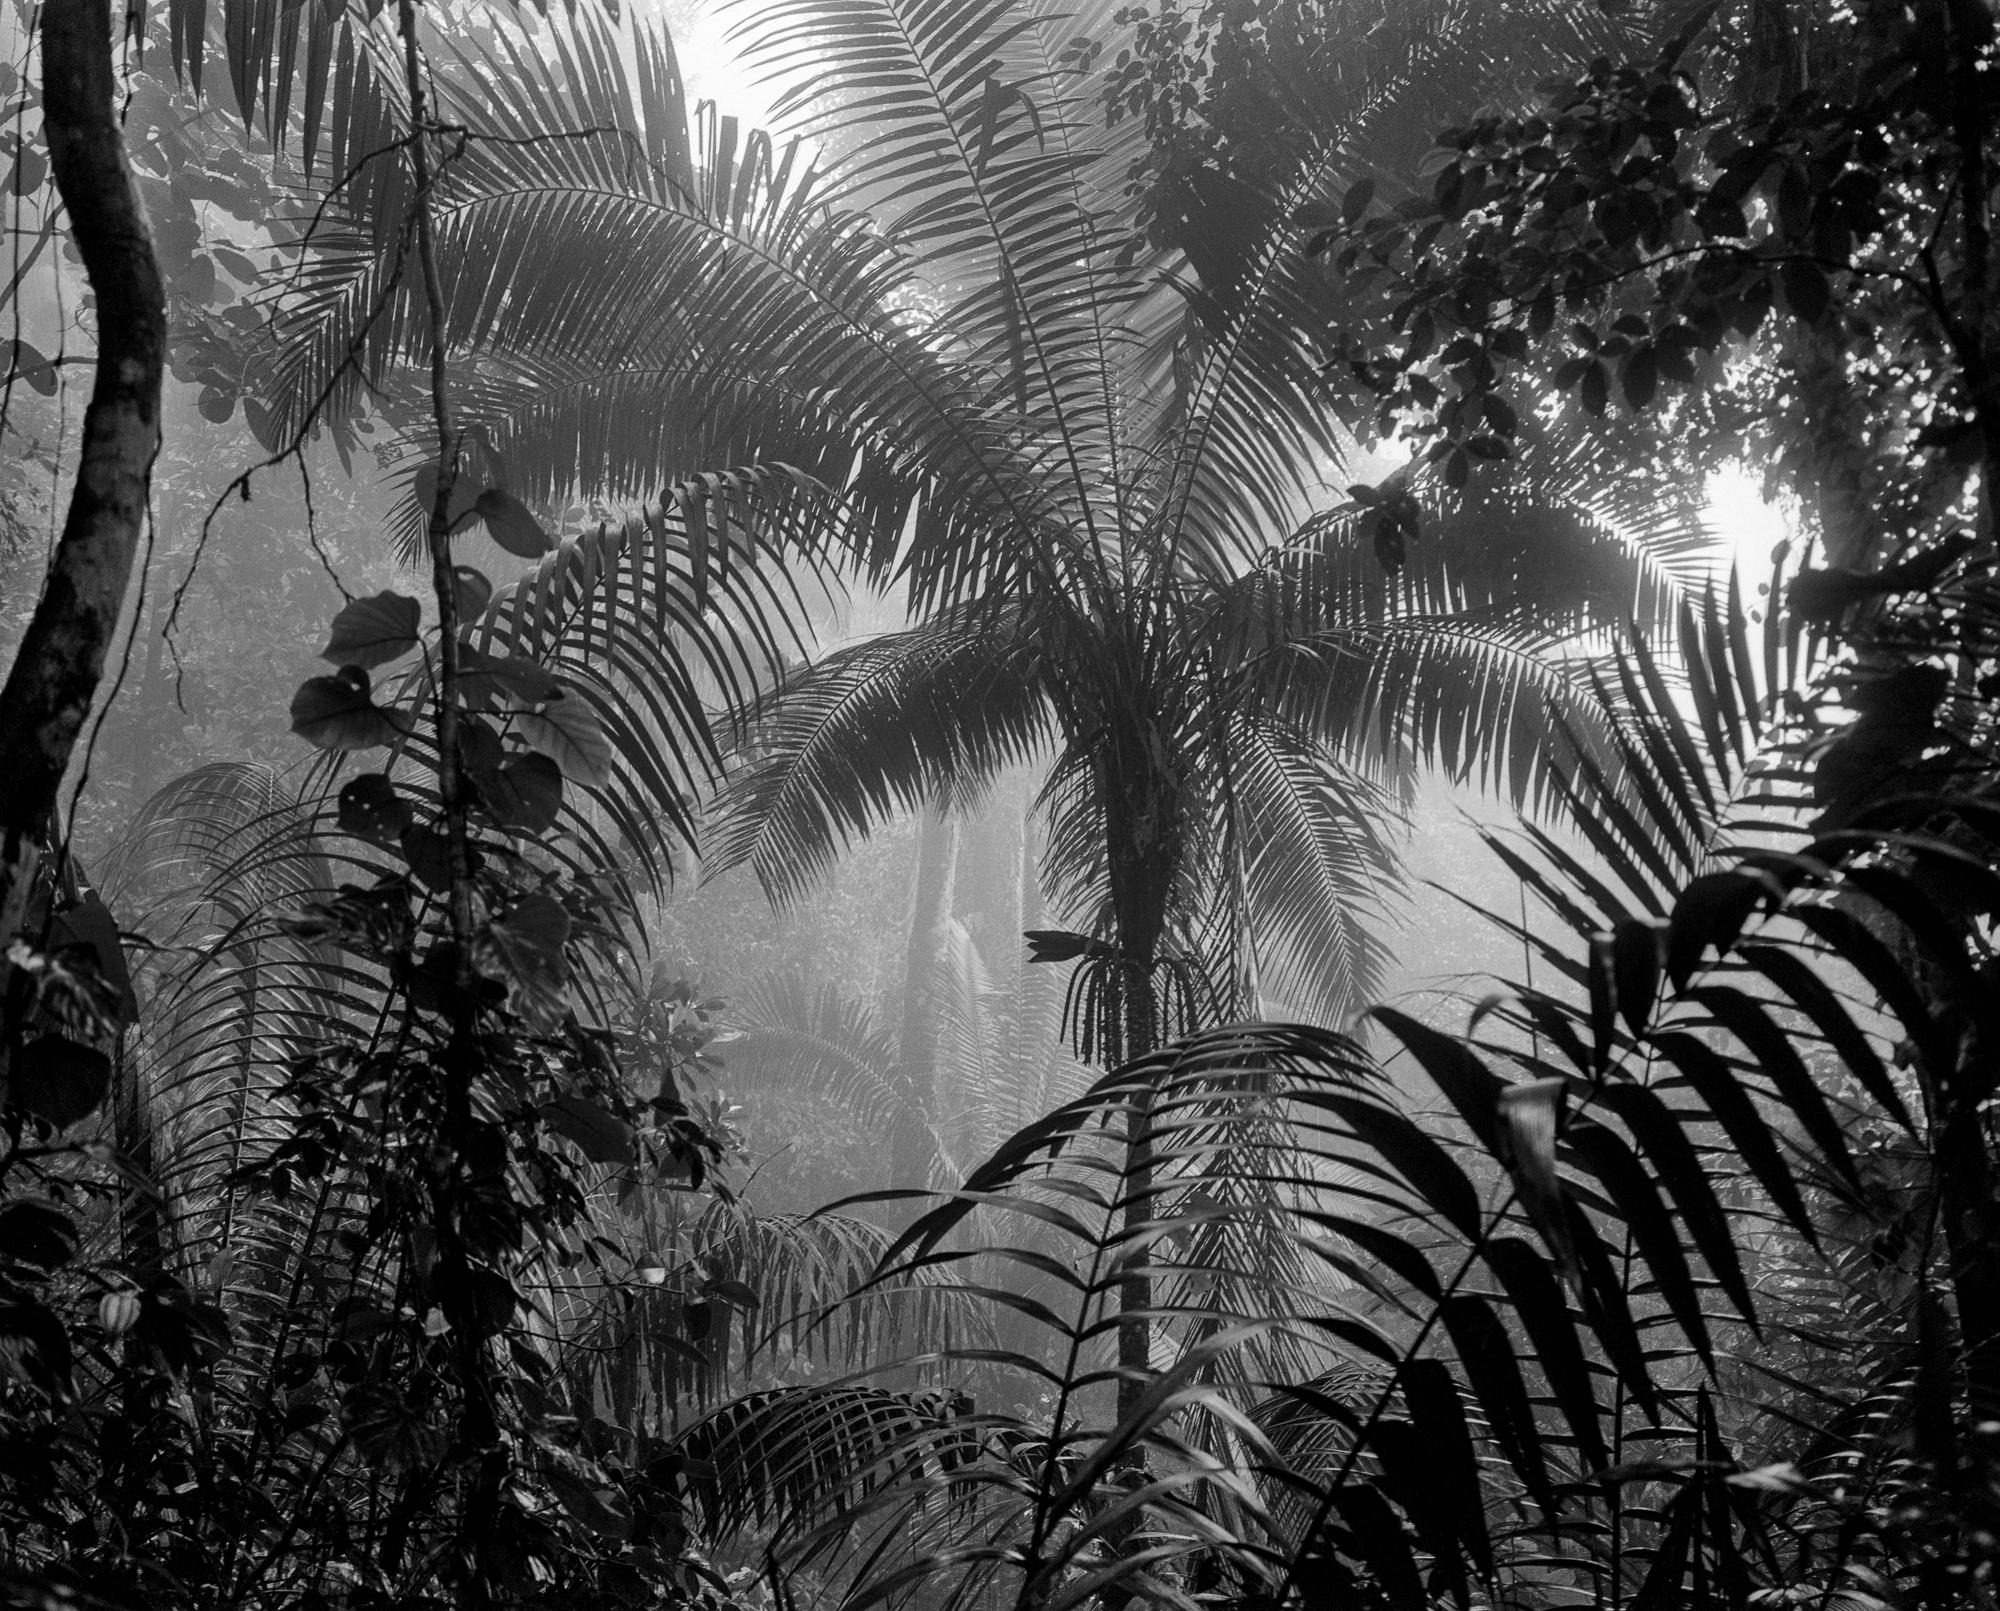 Miguel Winograd  Landscape Photograph - Bosque Húmedo Tropical II Nuqui, From the Series Bosques. B&W Photography